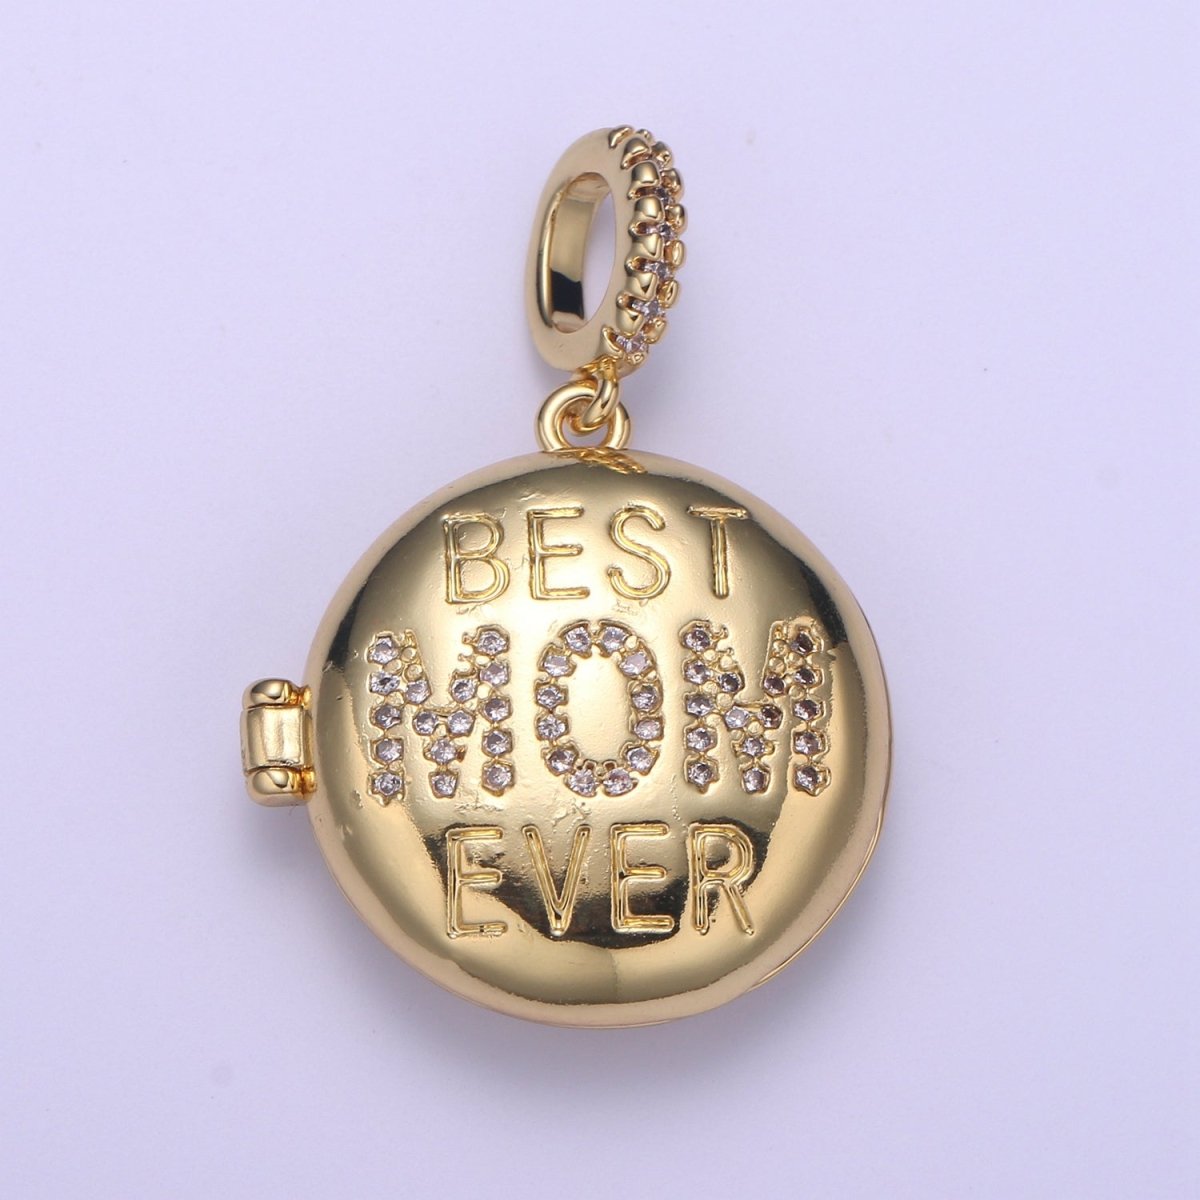 Best Mom Ever Locket Circle Pendants Gold / Silver with CZ Crystal Gold Filled Pendants Mother day gift Picture Necklace H-722 H-723 - DLUXCA